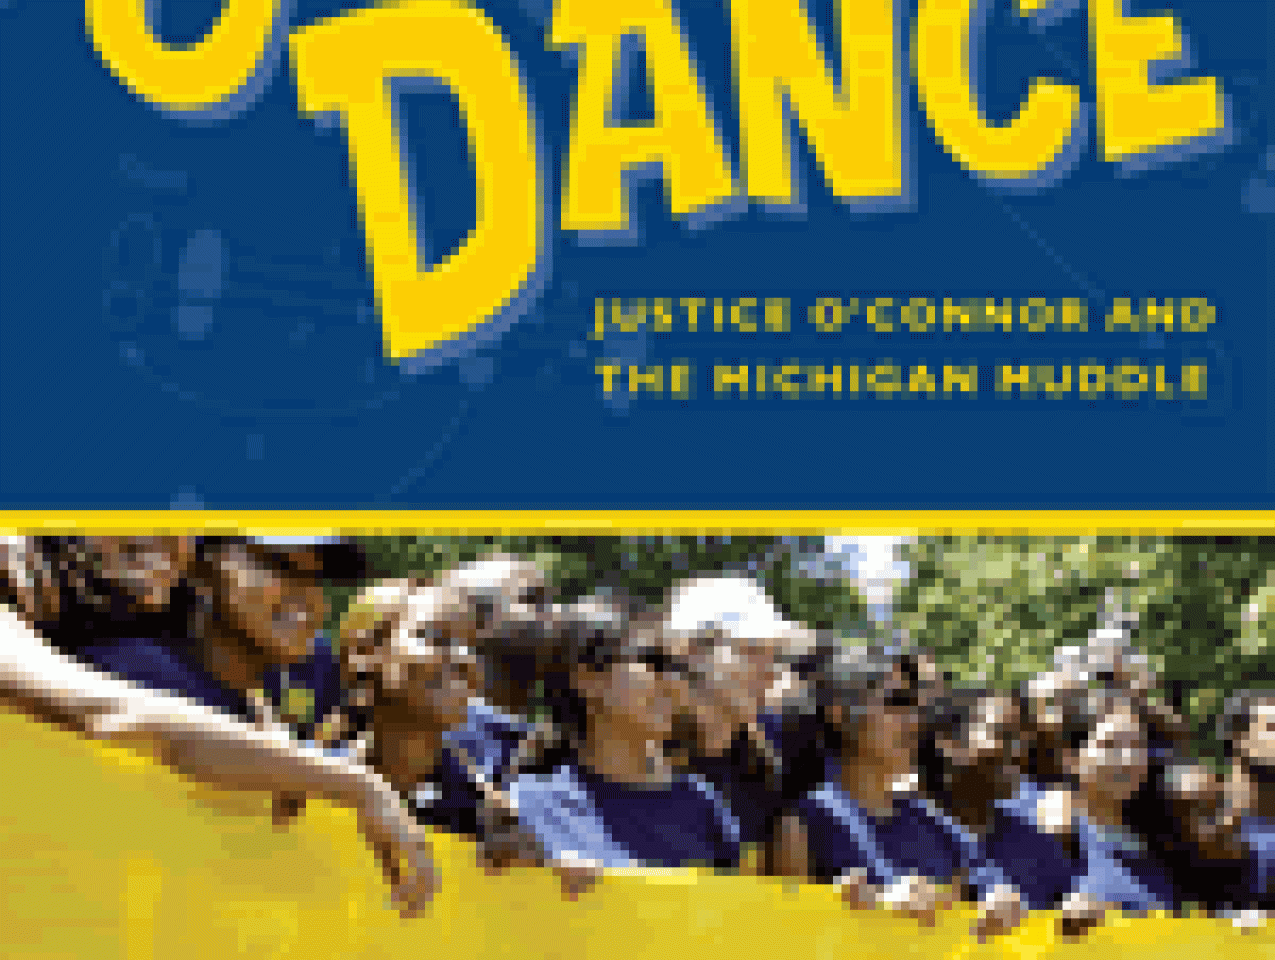 Swing Dance: Justice O'Connor and the Michigan Muddle